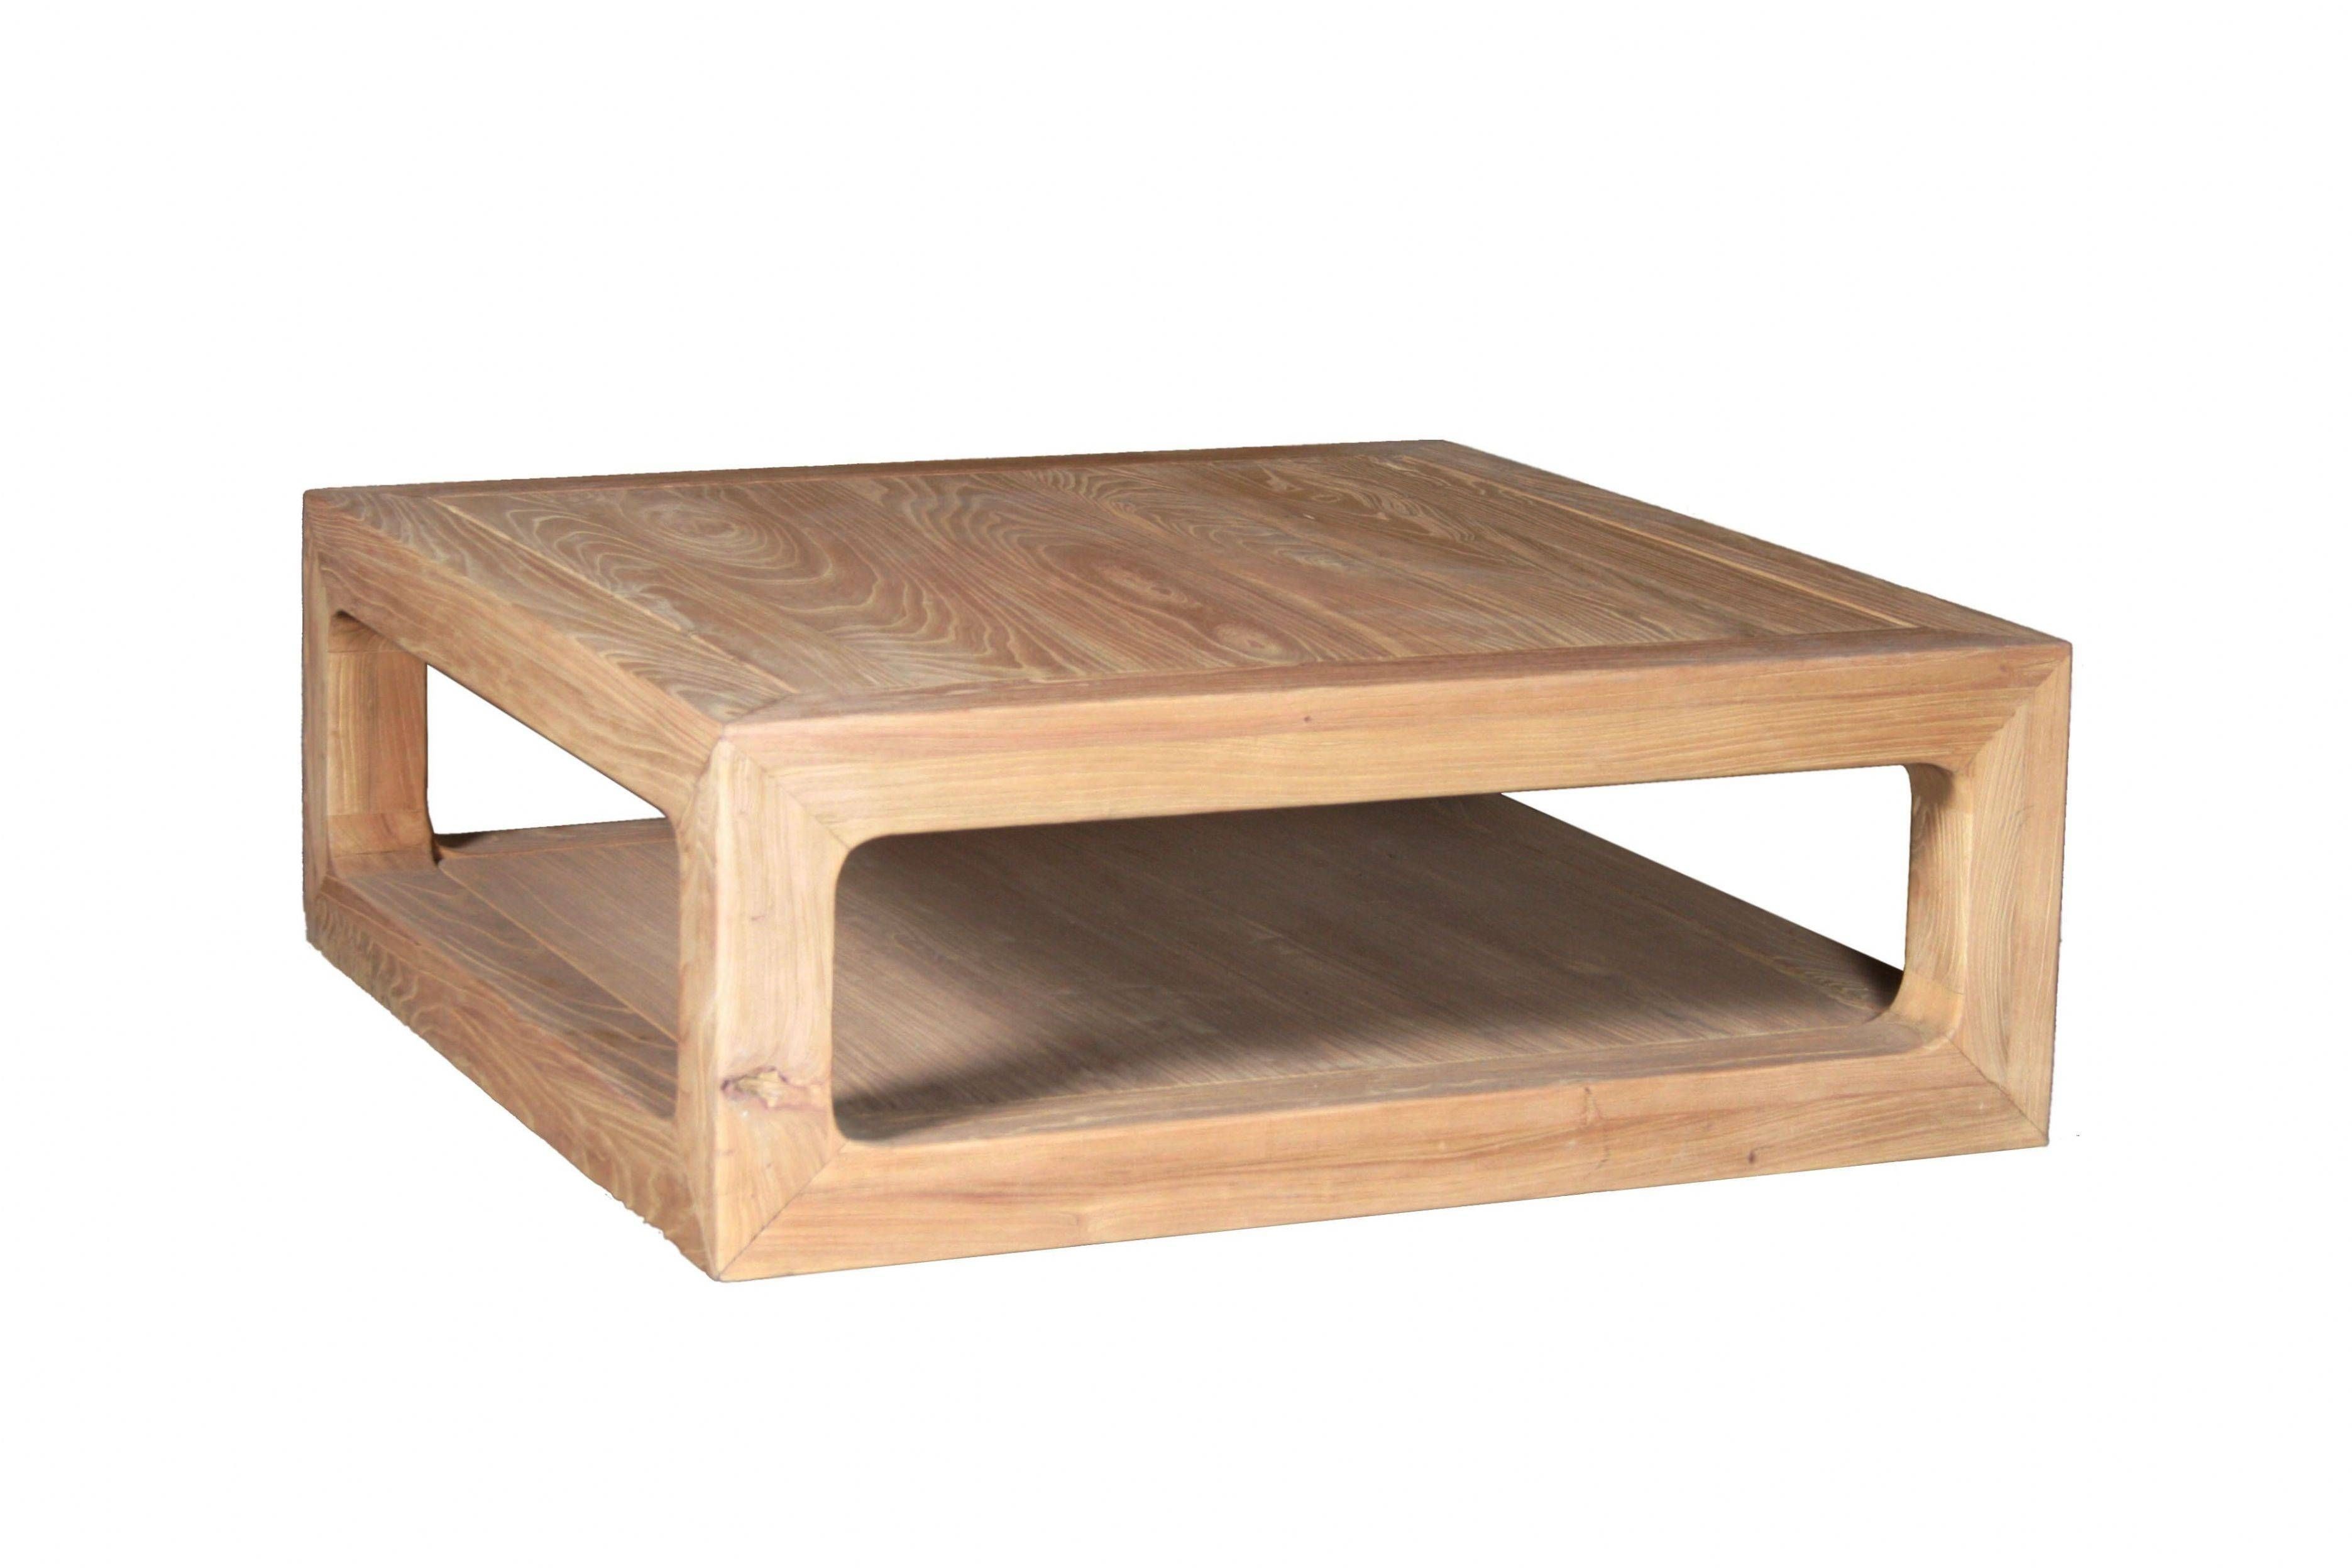 Reclaimed Wooden Coffee Table Contemporary Wooden Coffee Tables With Square Shaped Coffee Tables (View 8 of 30)